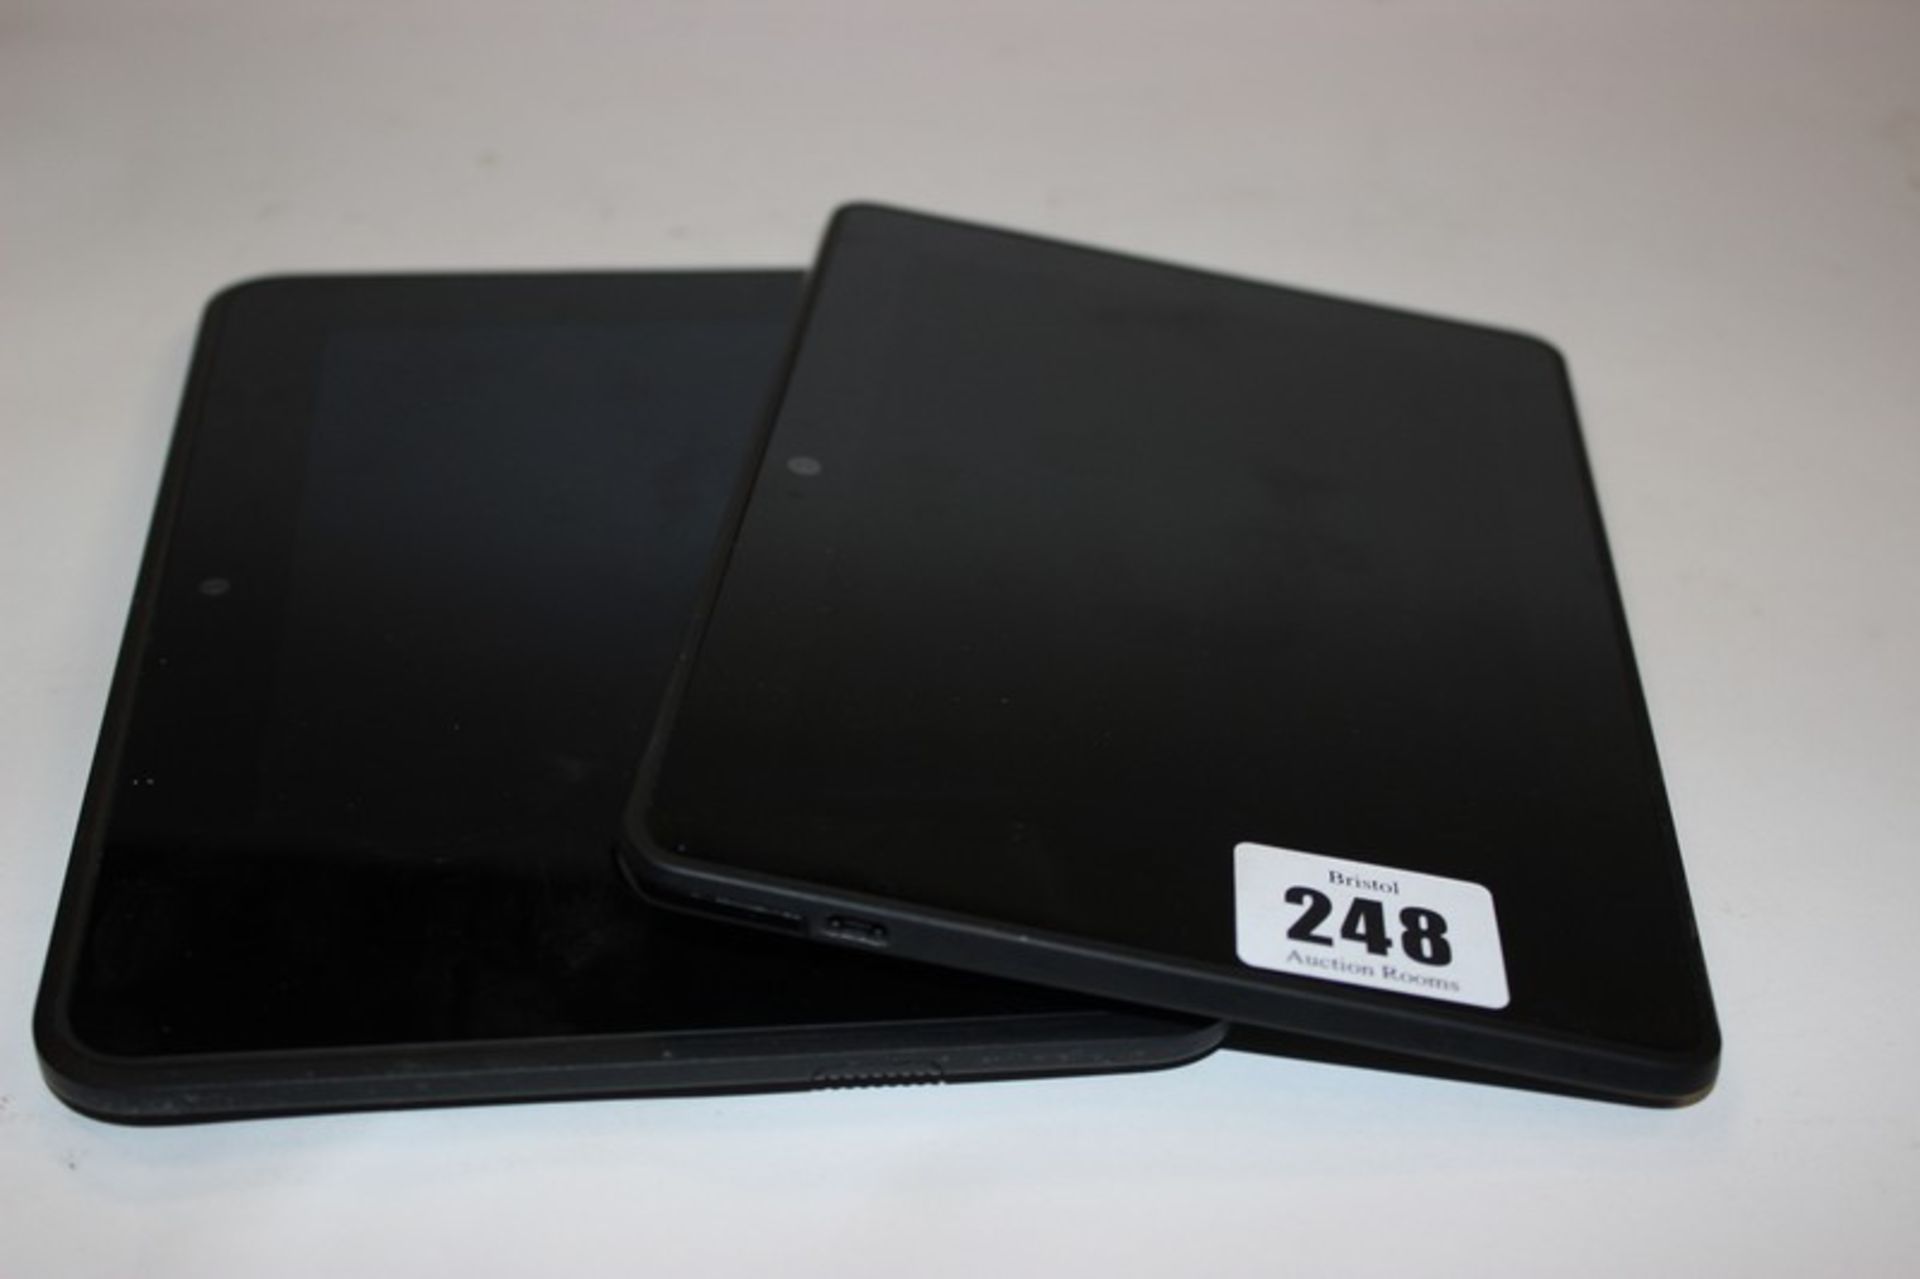 A Kindle Fire HD 7" model: X43Z60 and a Kindle Fire HDX 3rd Generation model: C9R6QM.